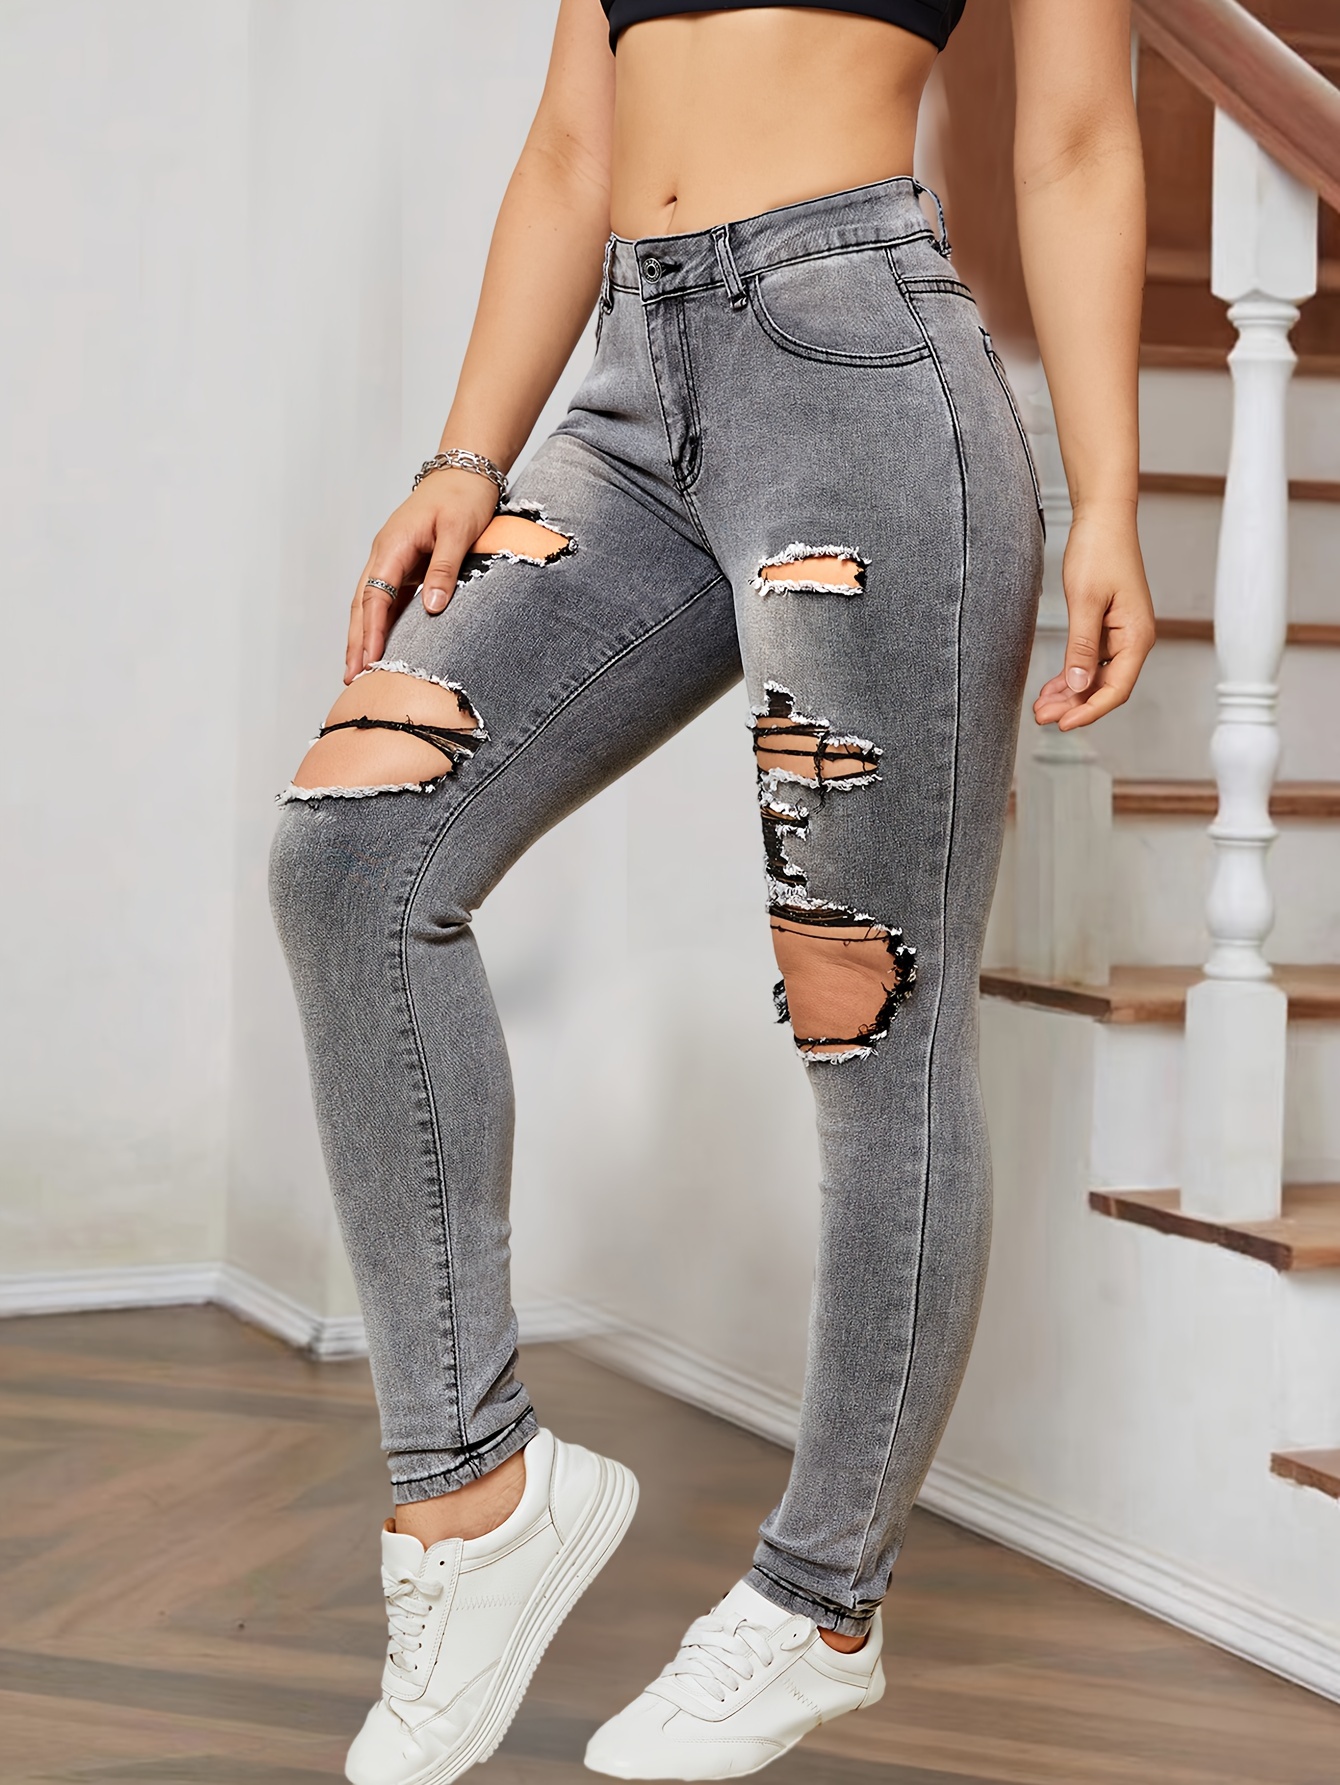 Ripped Holes Casual Skinny Jeans, Slim Fit High Stretch Distressed Tight  Jeans, Women's Denim Jeans & Clothing